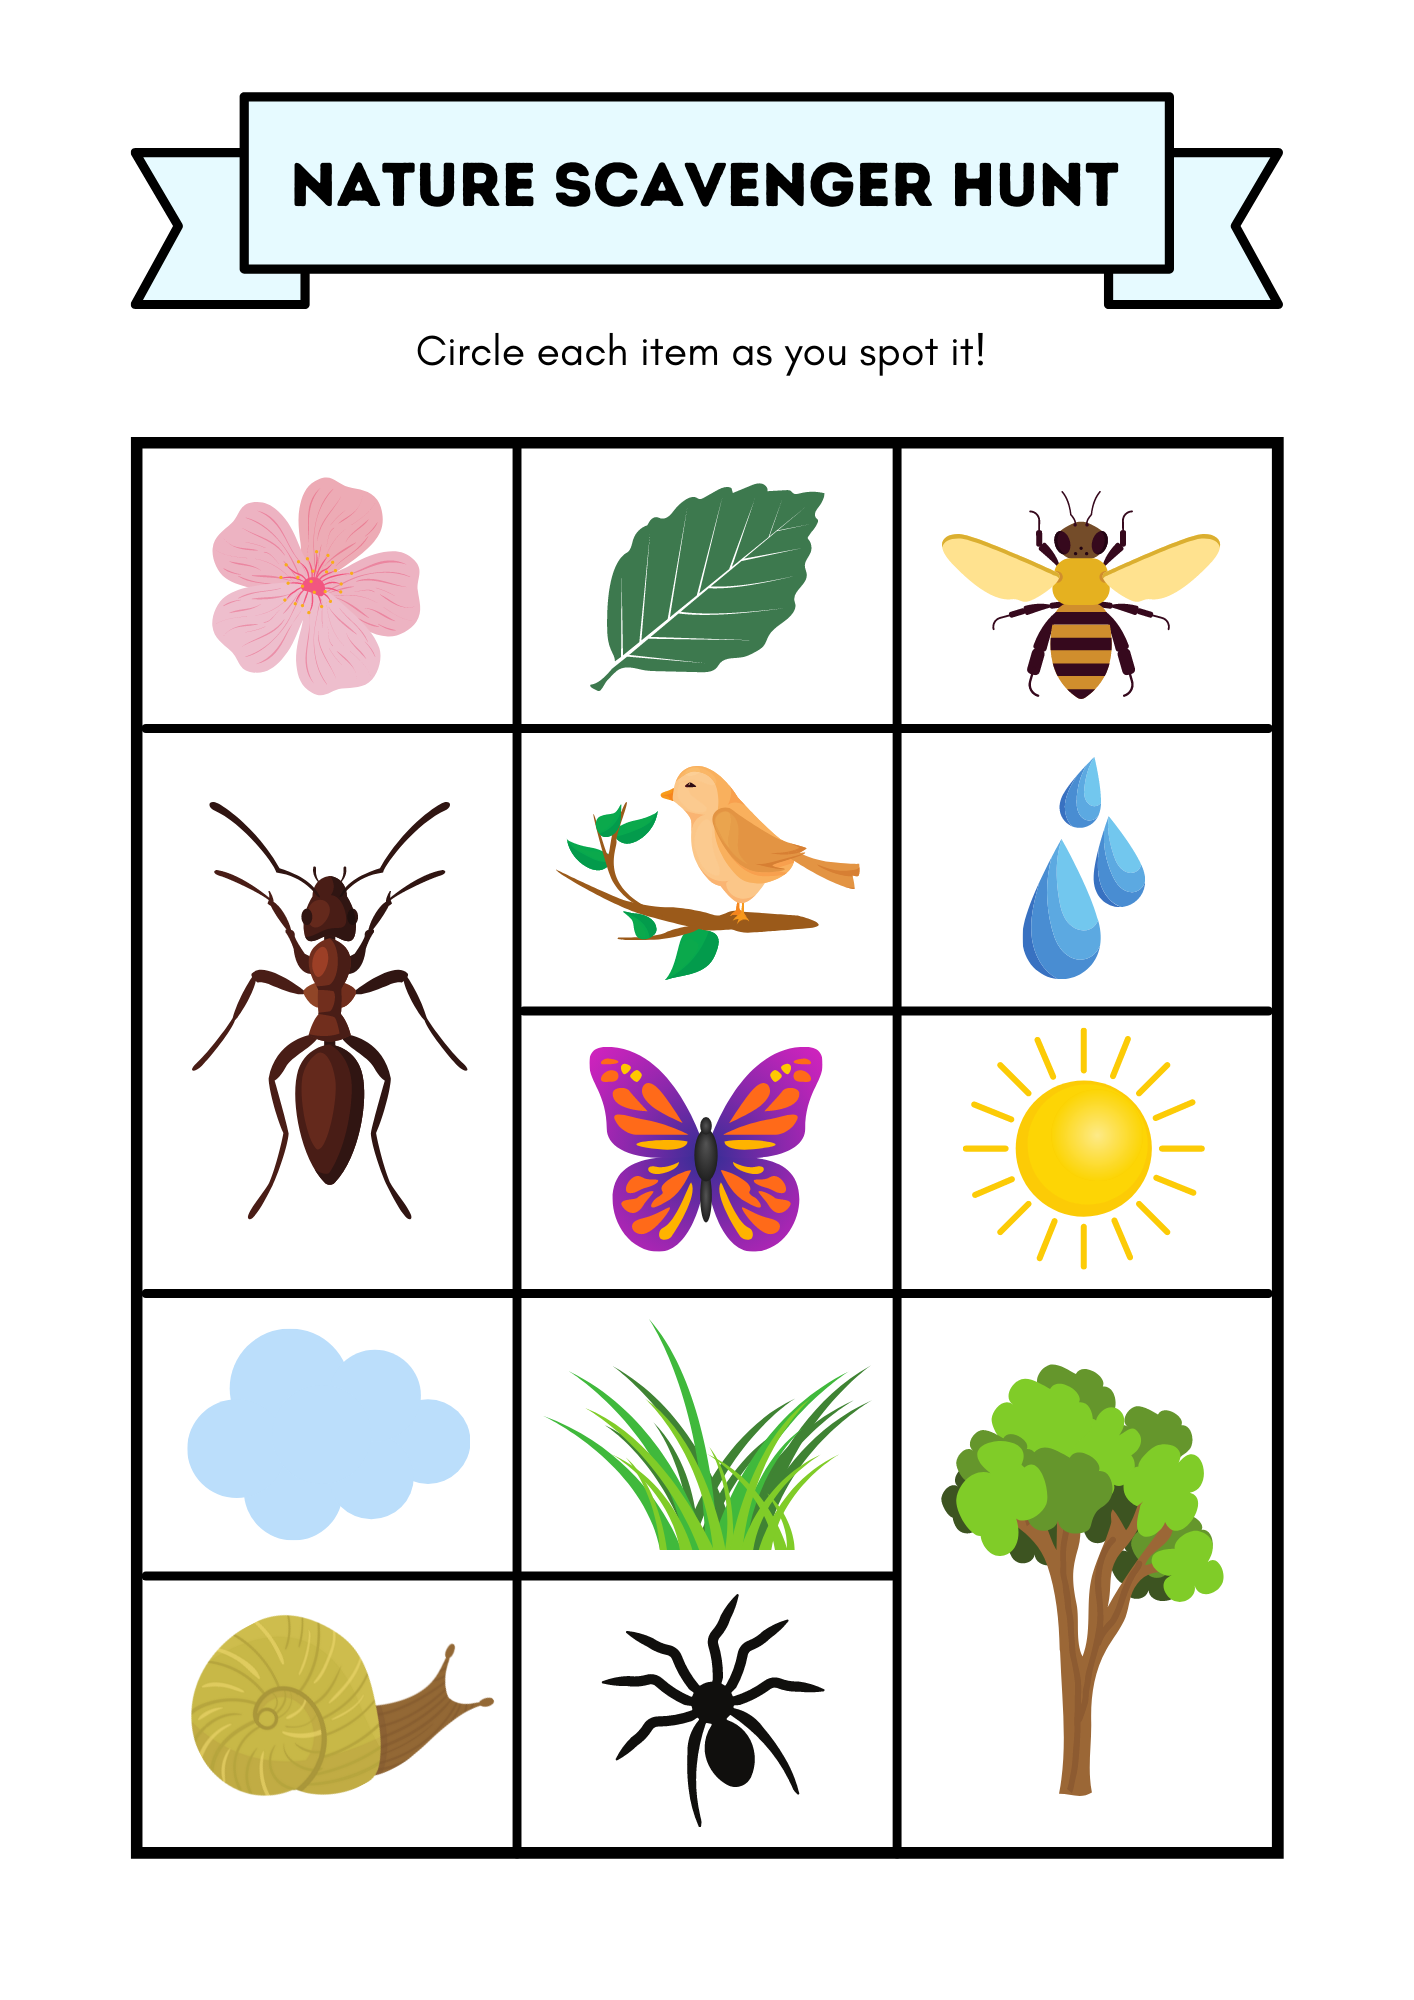 14 Fun Nature Themed printable activity pages for kids! - kidelp